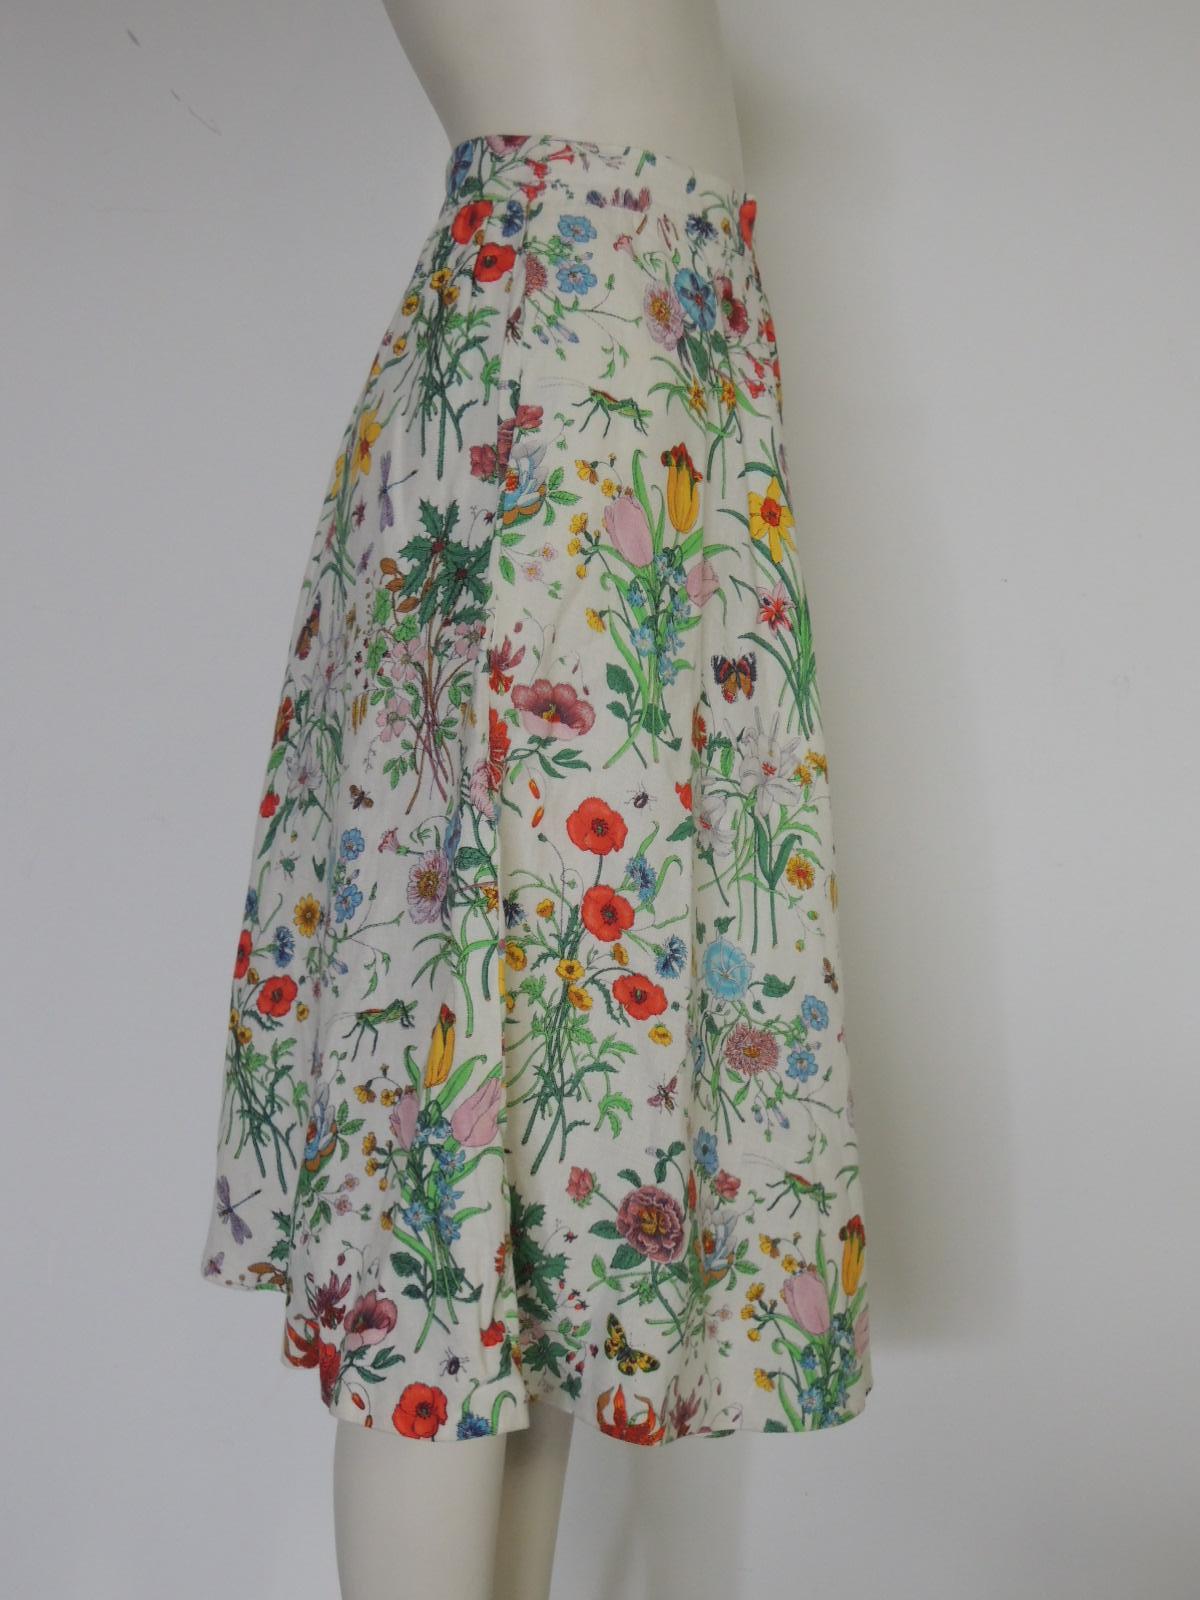 Vintage Gucci Linen Flora Print Skirt In Good Condition For Sale In Oakland, CA